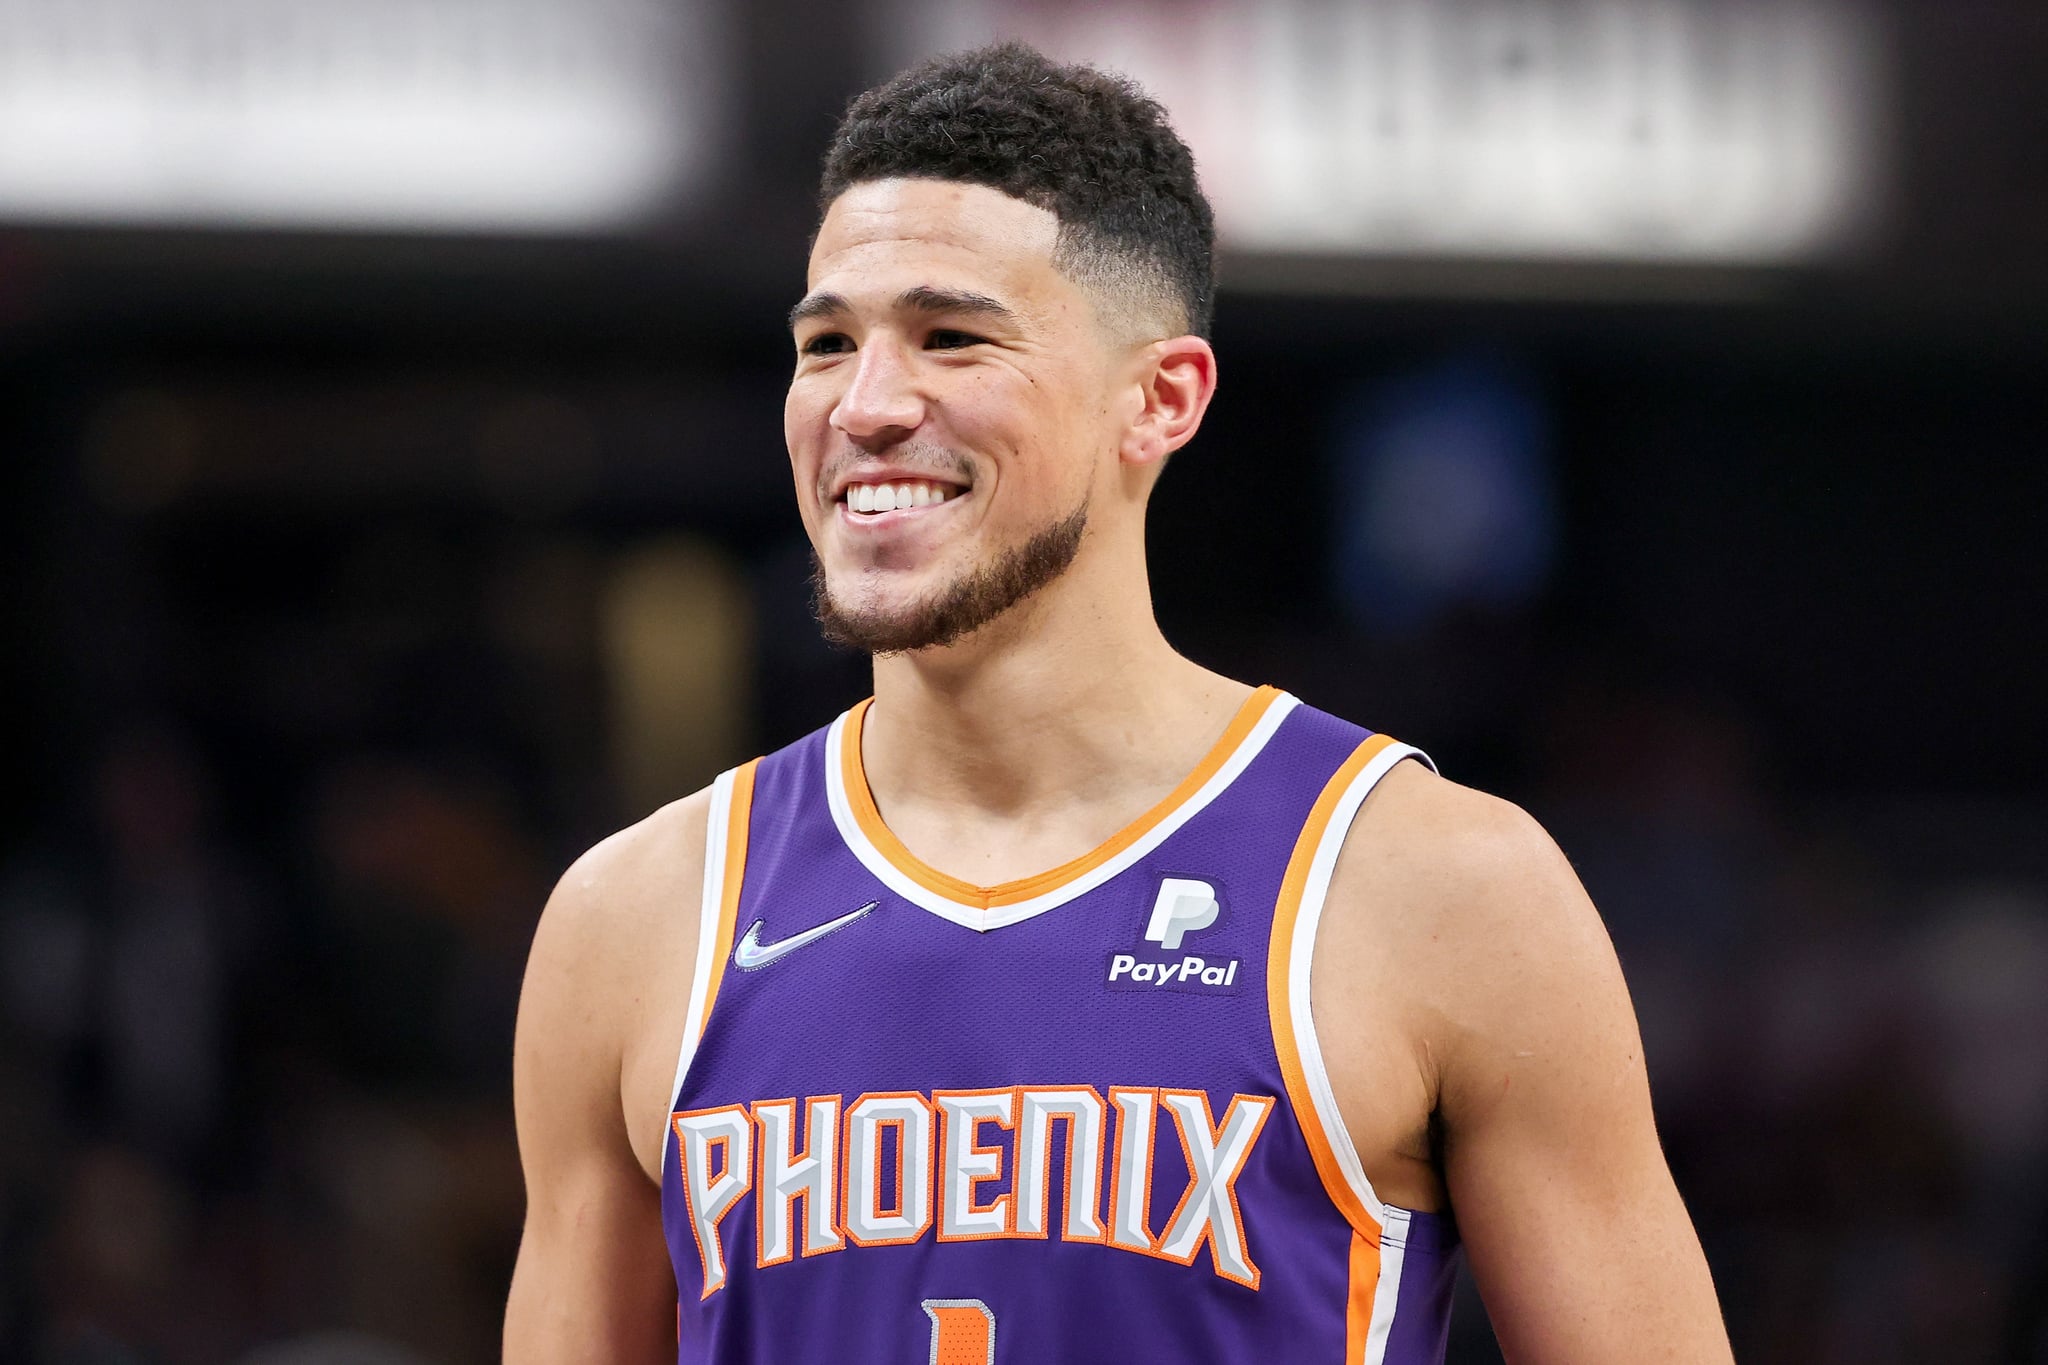 March 2022: Devin Booker Hints at His Happiness With Kendall Jenner